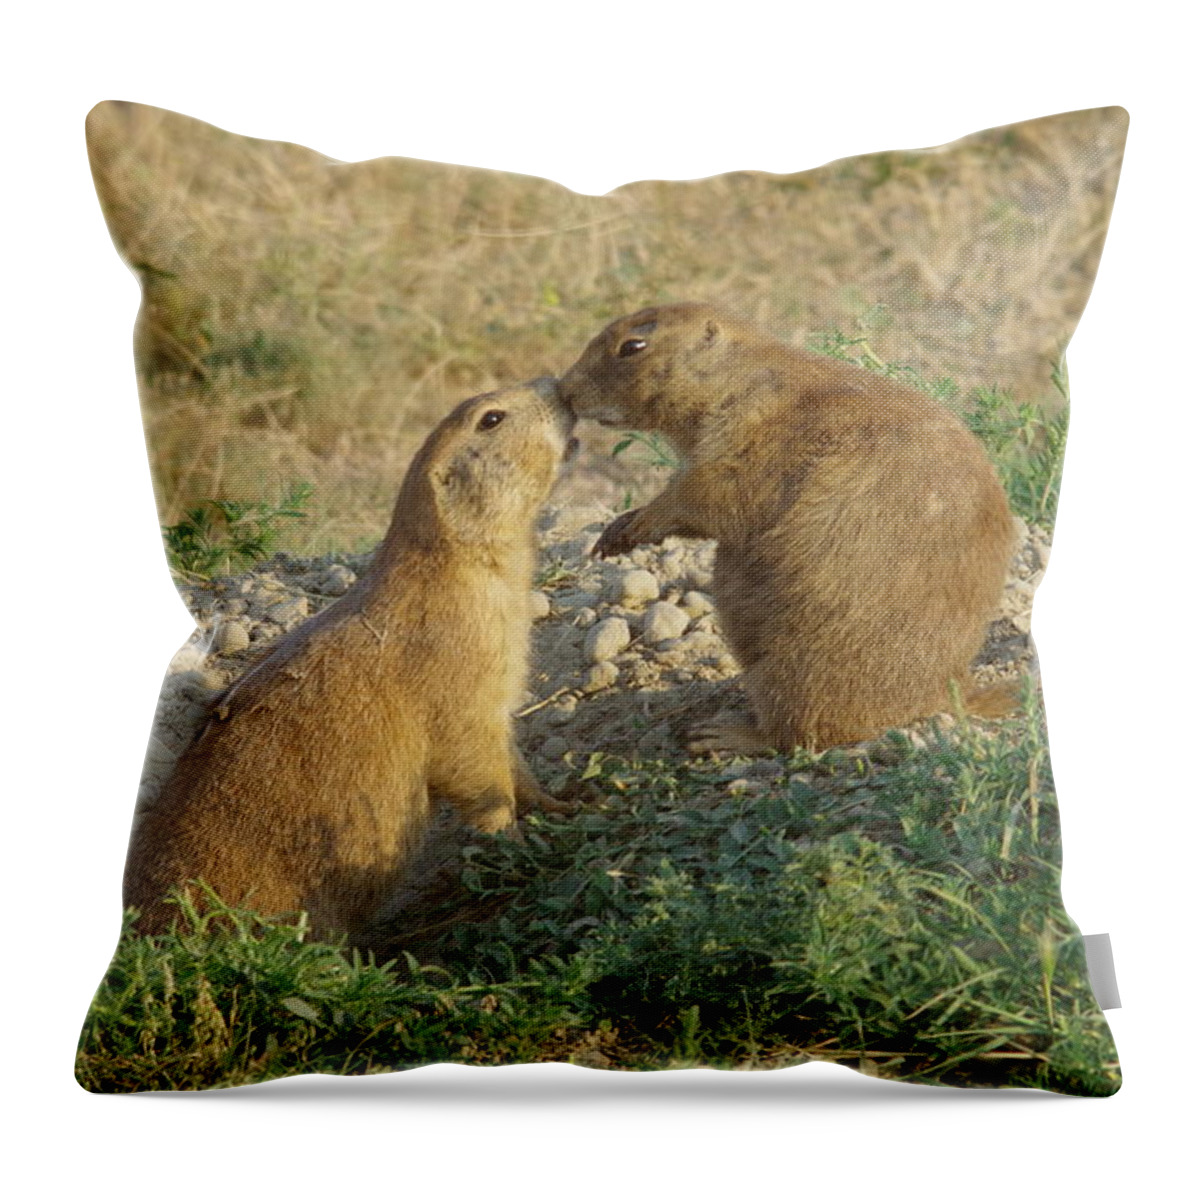 Prairie Dogs Throw Pillow featuring the photograph Prairie Dogs Kissing by Jeff Swan